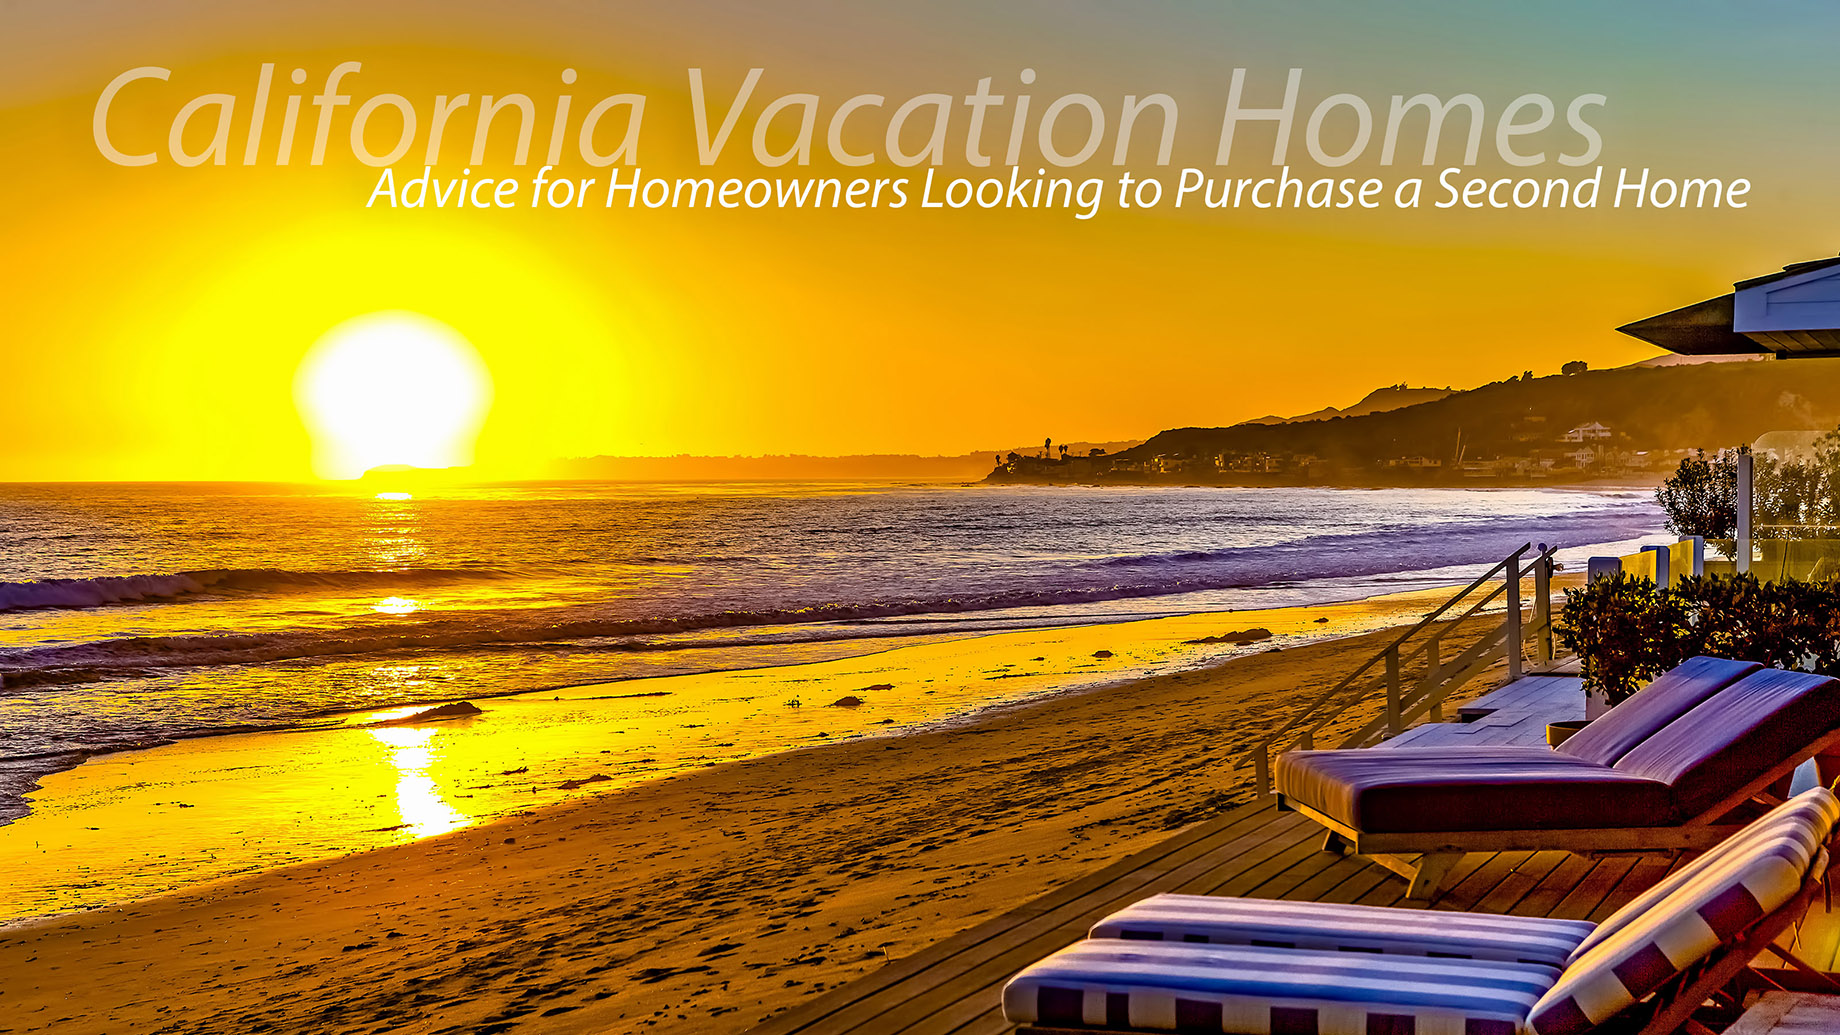 Californian Vacation Homes - Advice for Homeowners Looking to Purchase a Second Home